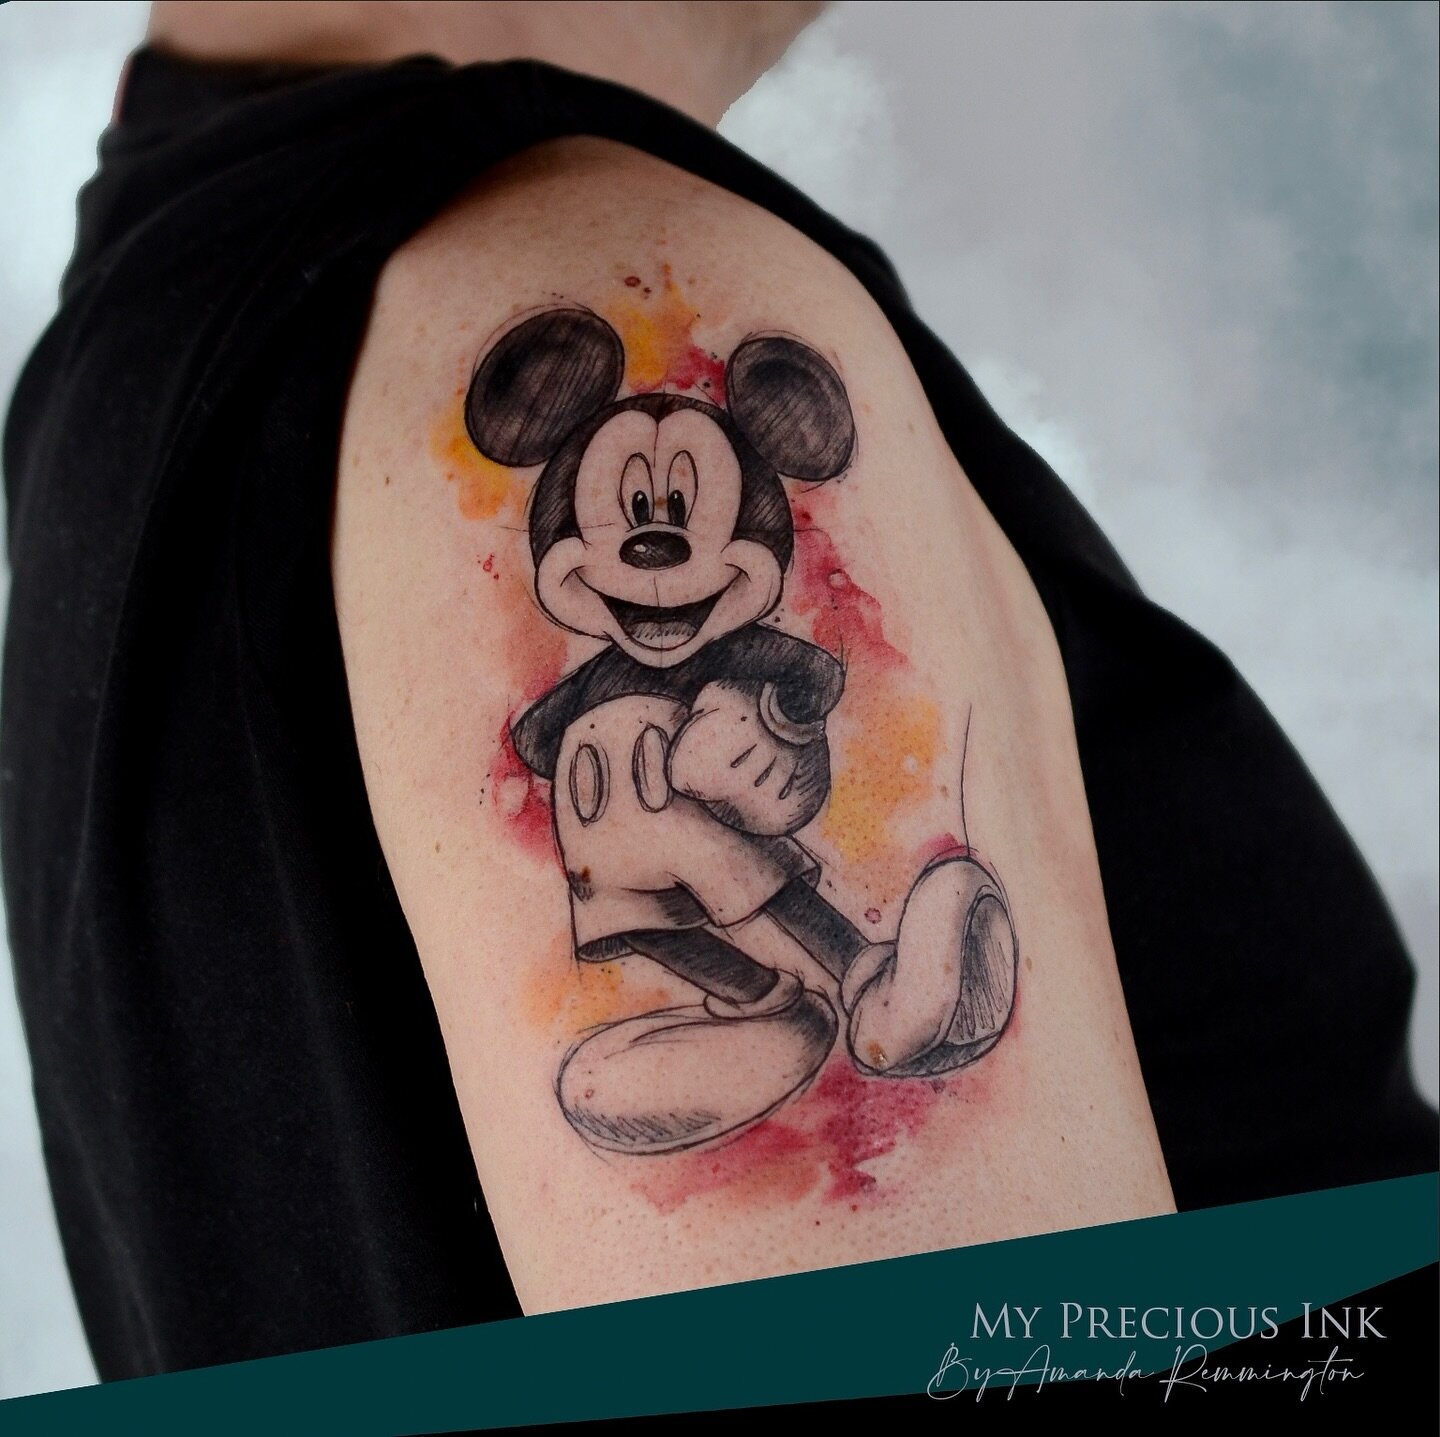 Mickey!! In sketch style with watercolor.
Love those Disney tattoo&rsquo;s ❤️
Who would you get?

///&mdash;&mdash;&gt; www.mypreciousink.nl &lt;&mdash;&mdash;\\\

#Tattoo #watercolortattoo #watercolourtattoo #watercolor #thebesttattooartists #tattoo